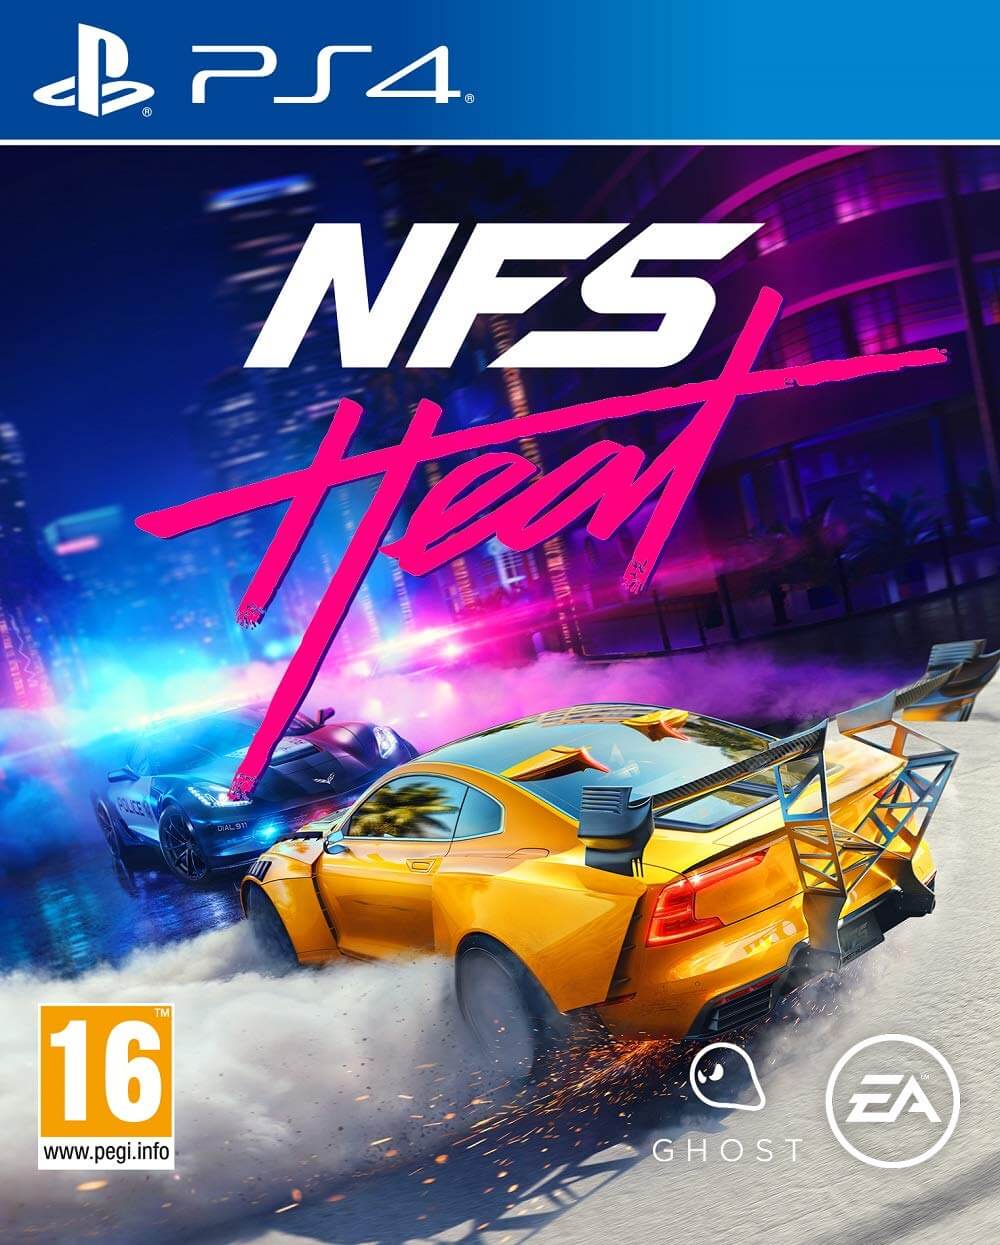 PS4 CD NFS PAYBACK HEAT - Dreamworks Direct